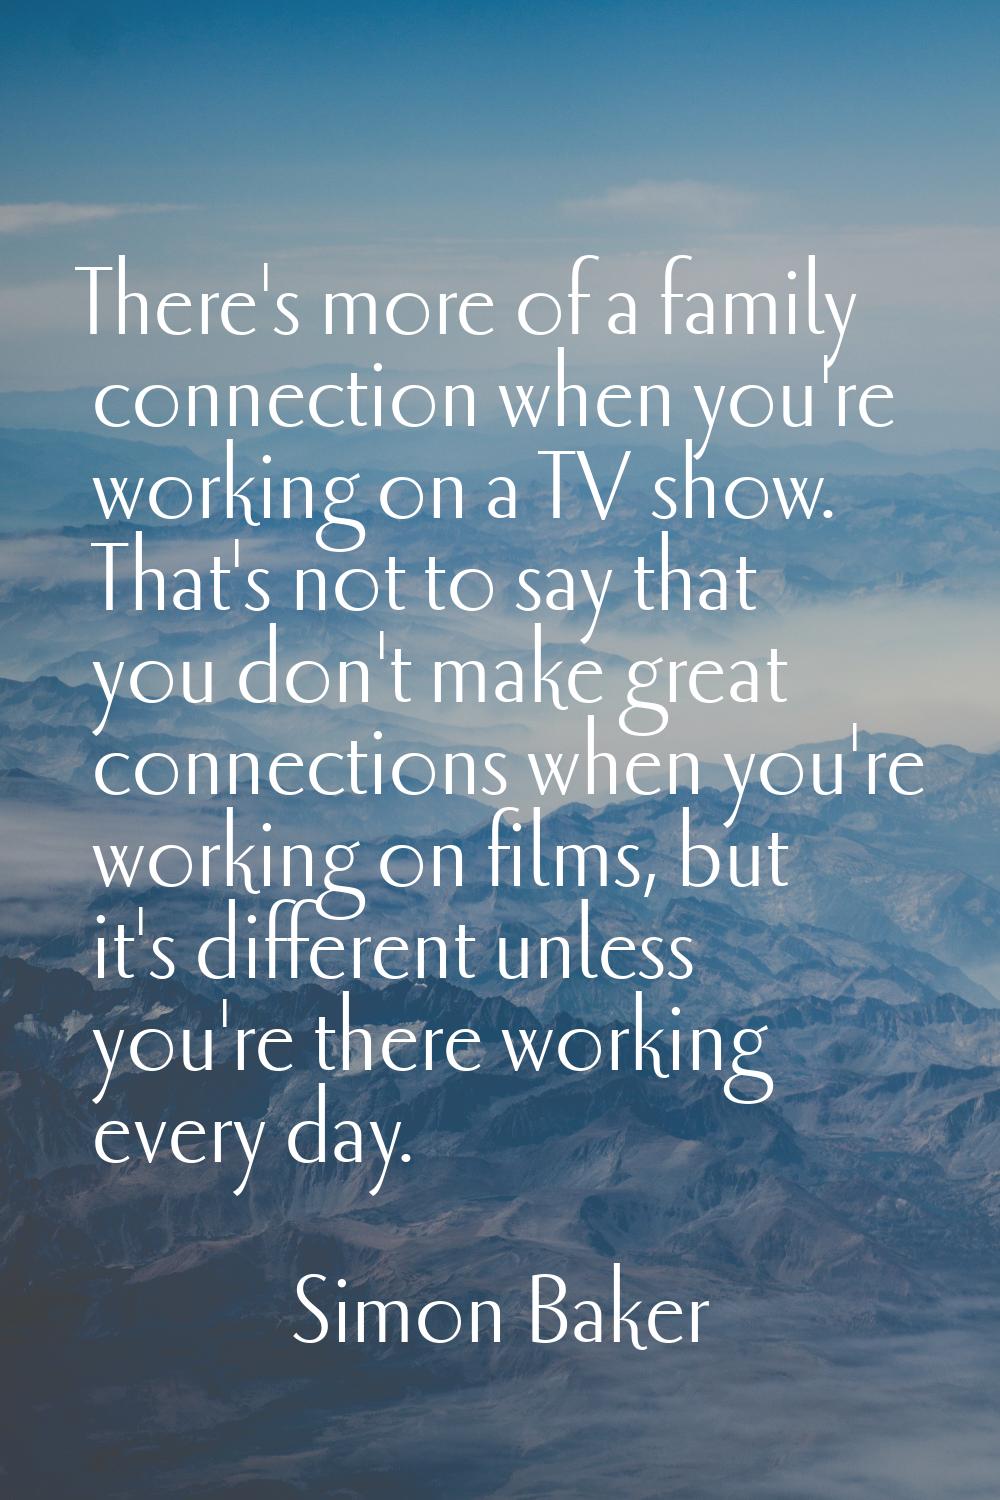 There's more of a family connection when you're working on a TV show. That's not to say that you do